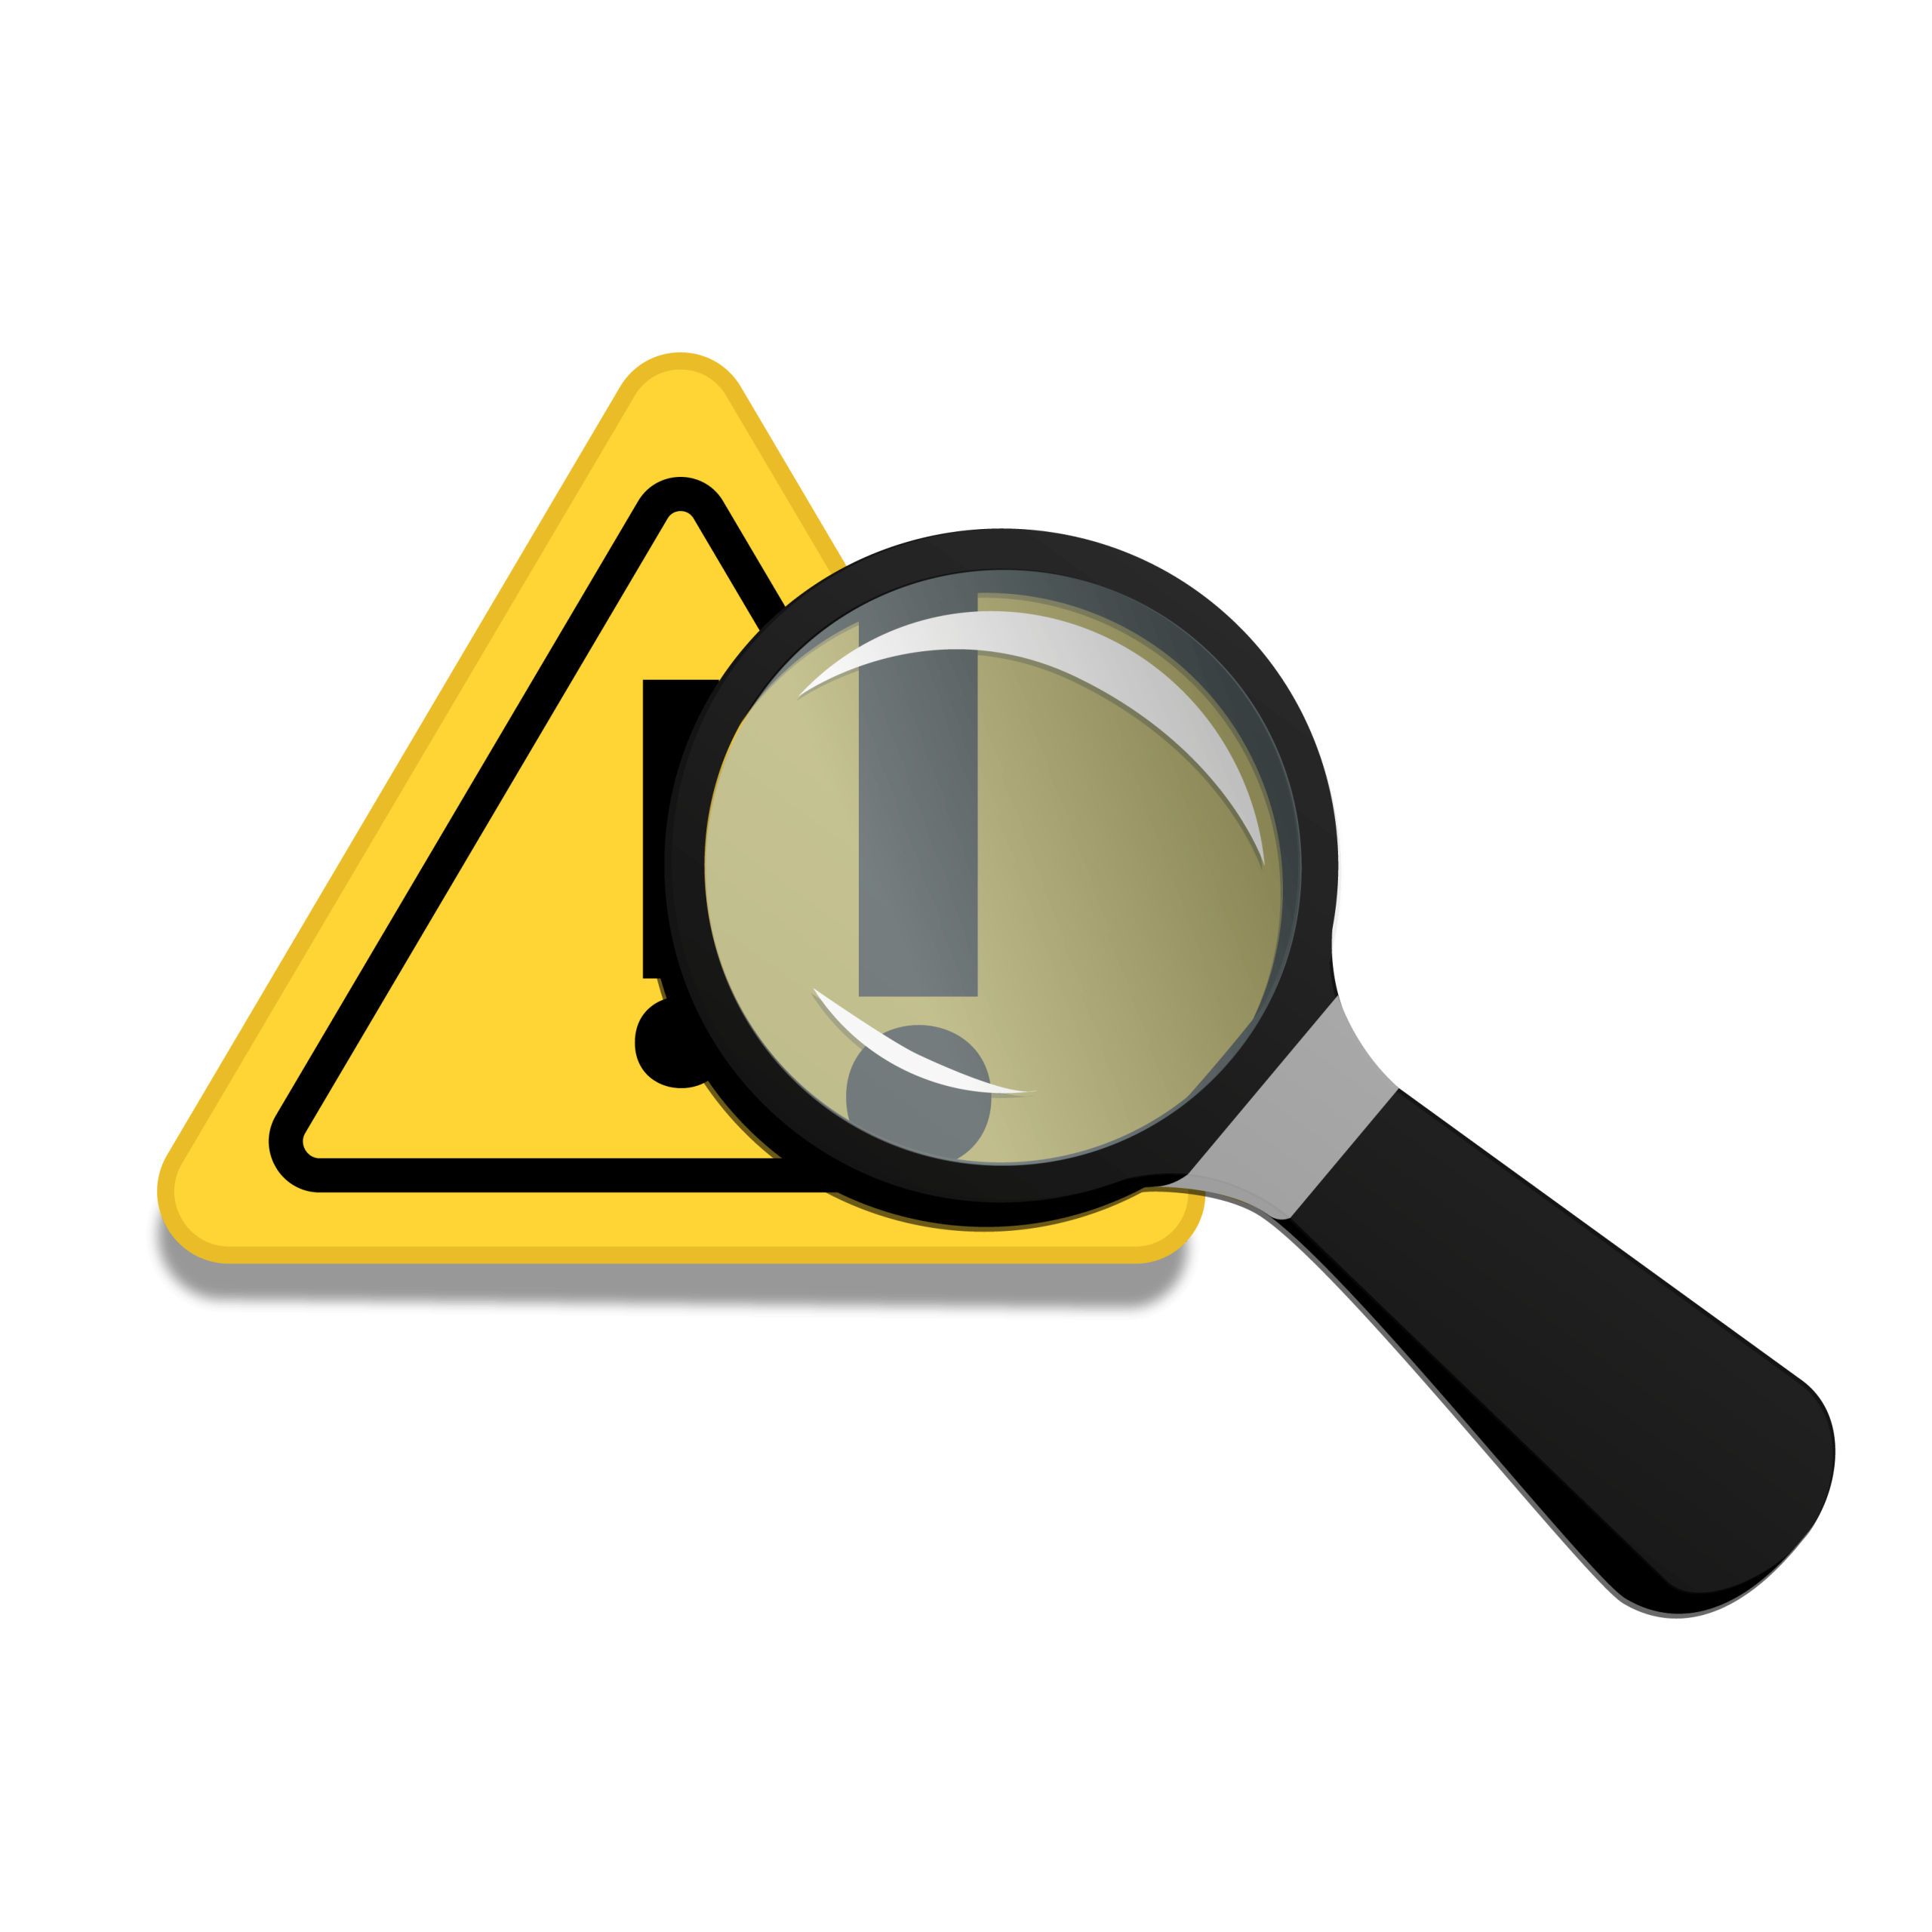 magnifying glass looking at a warning sign to spot problems